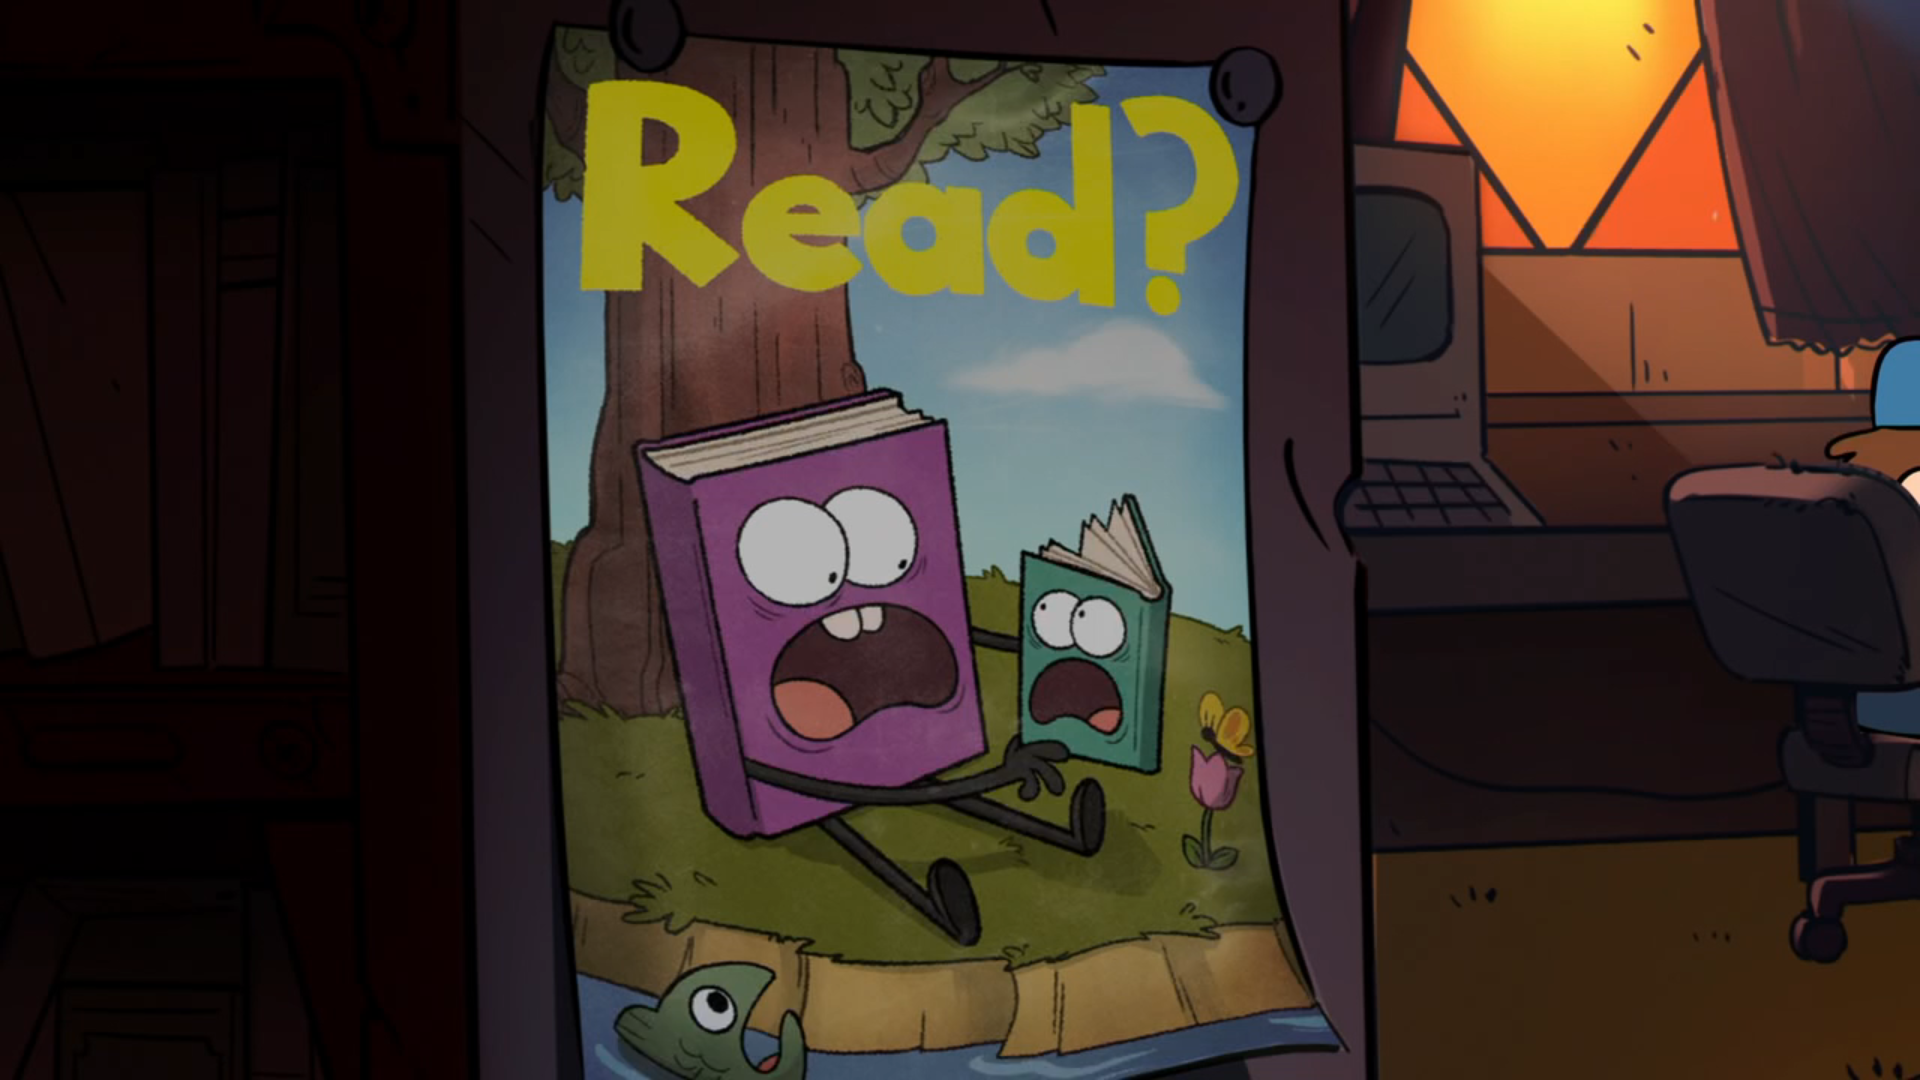 Image S2e4 read poster.png Gravity Falls Wiki FANDOM powered by Wikia